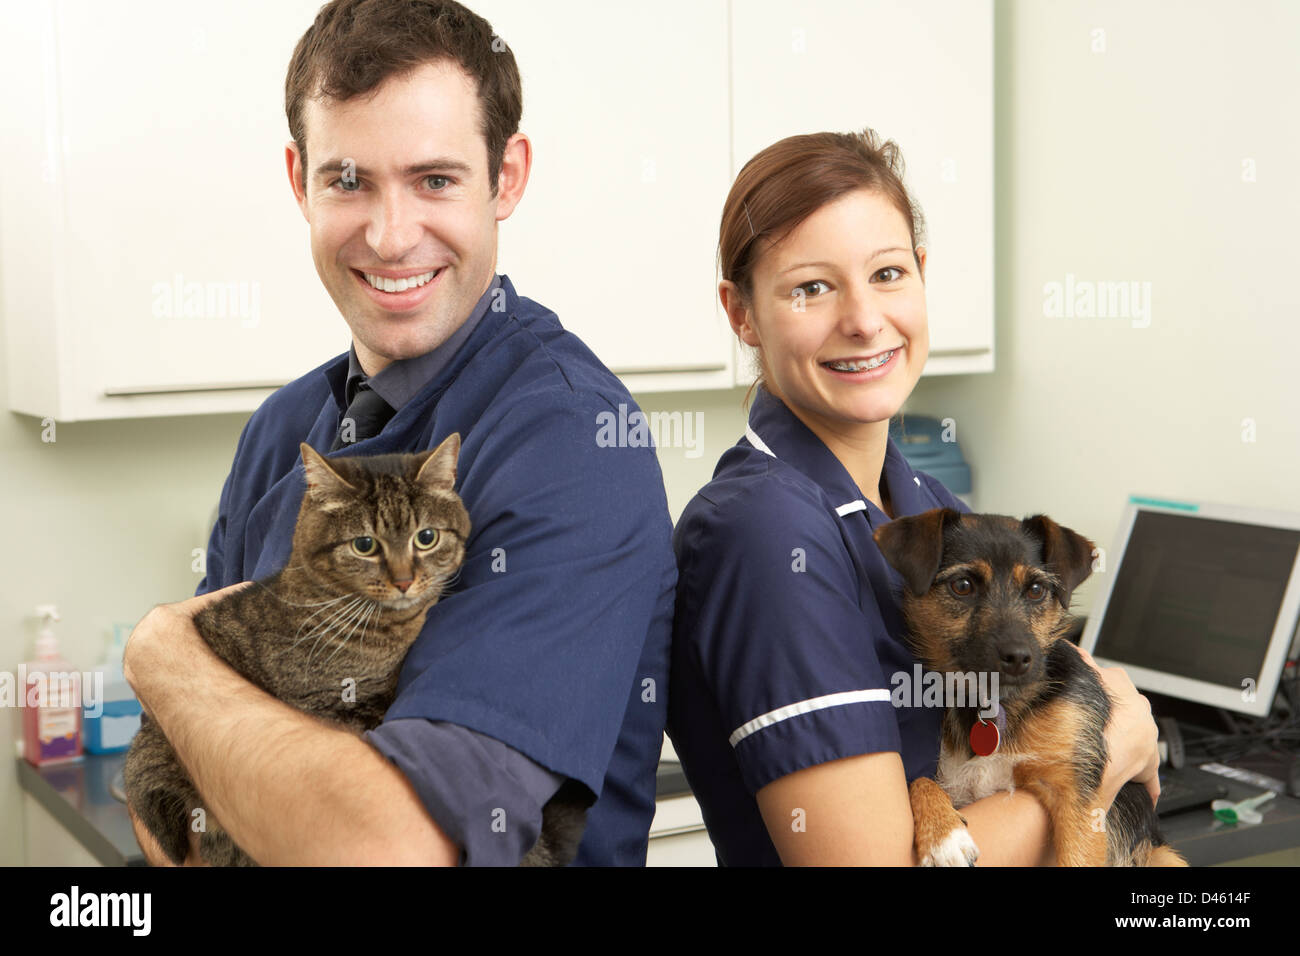 Male Veterinary Surgeon And Nurse Holding Cat And Dog In Surgery Stock Photo